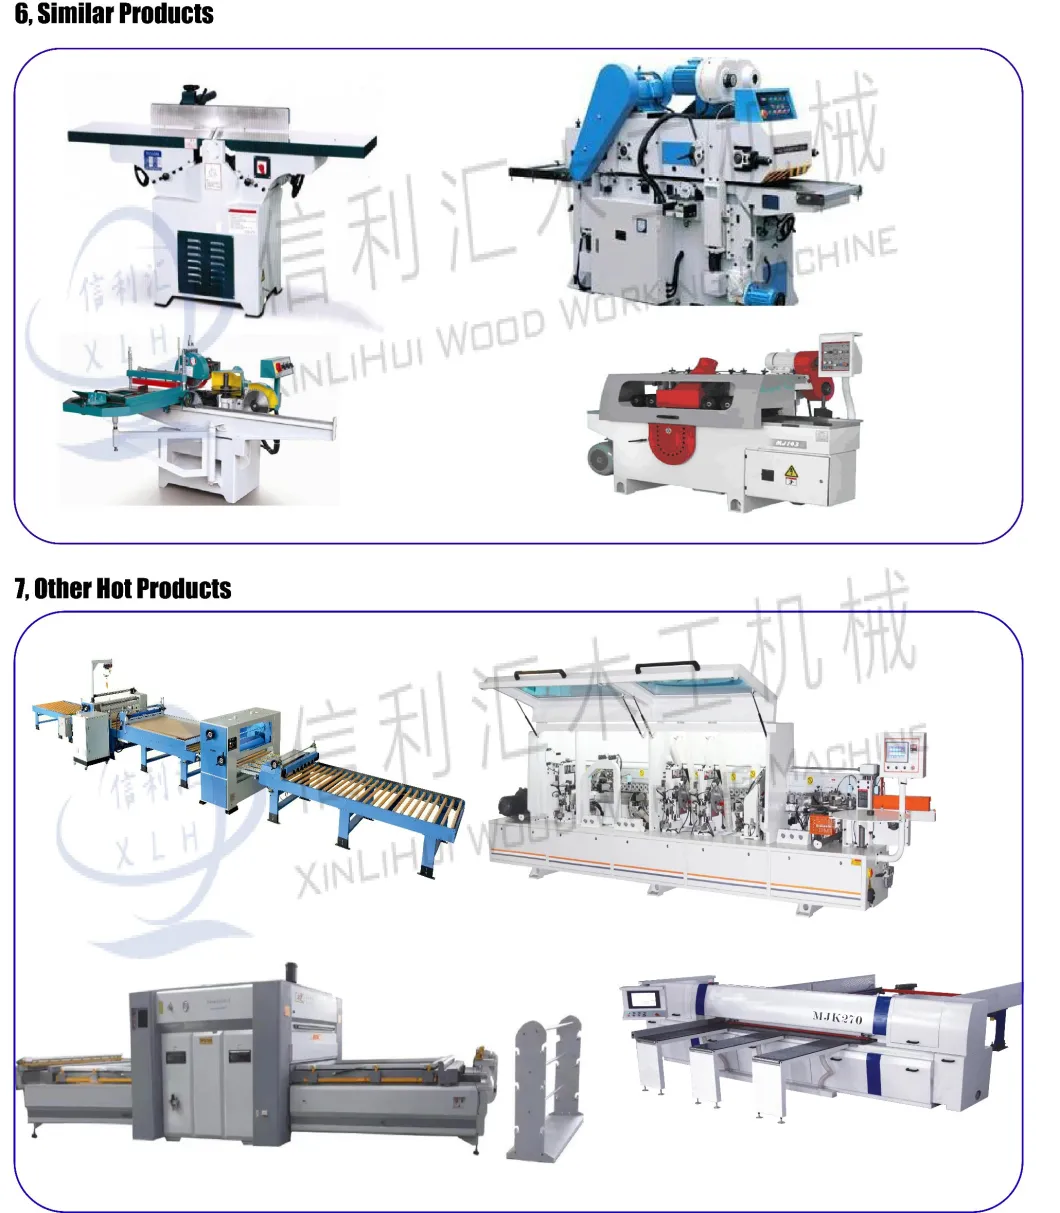 Supply Woodworking Sawing and Milling Machine, Machinery Circular Saw Blade and Canteadora for Wood